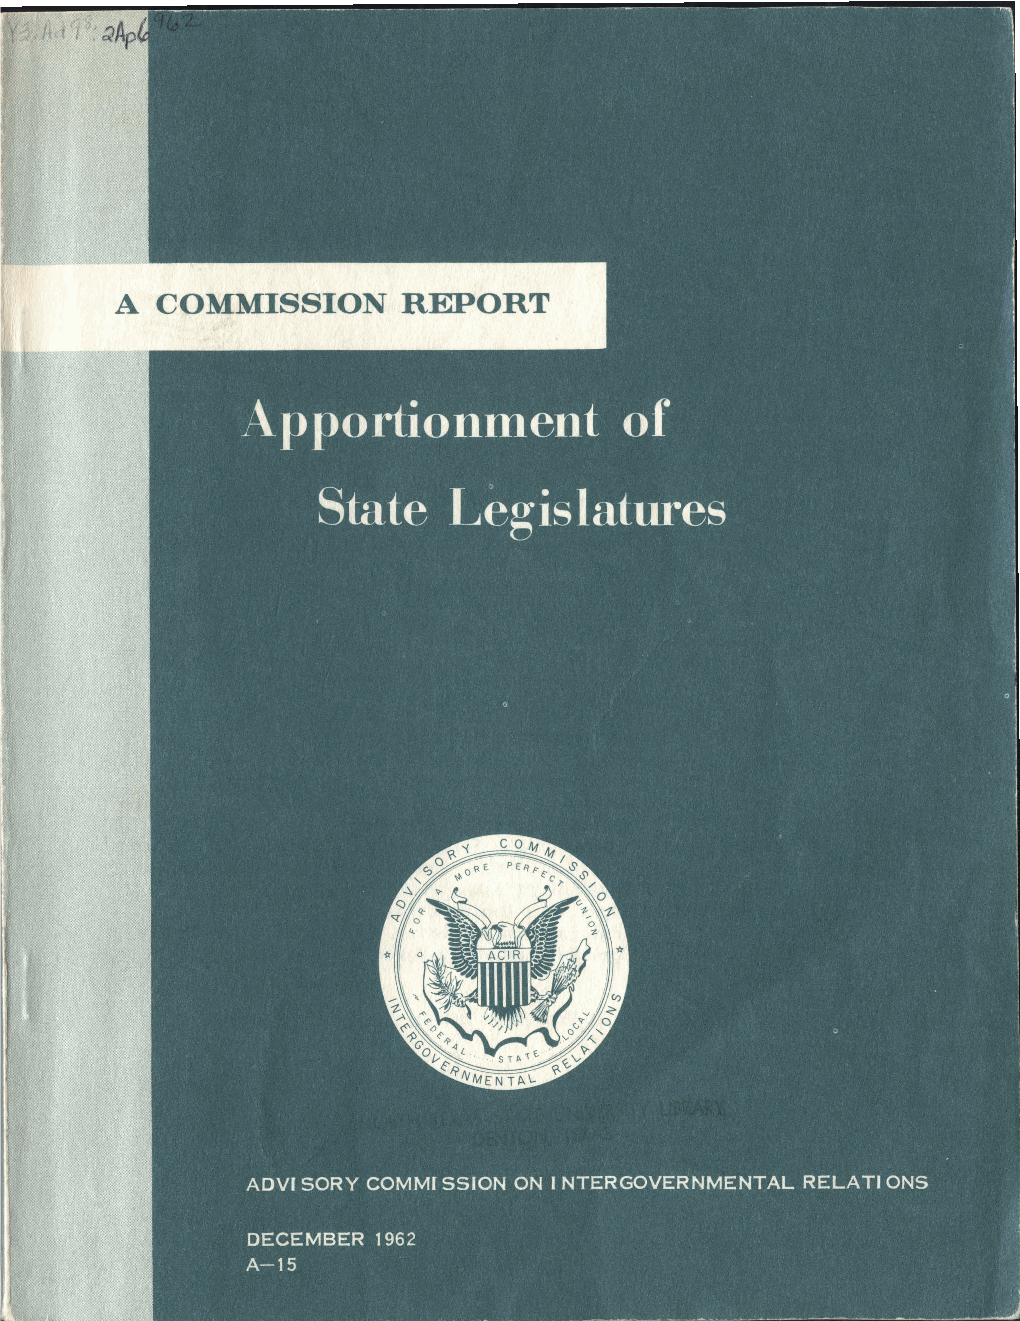 Apportionment of State Legislatures, Commission Report